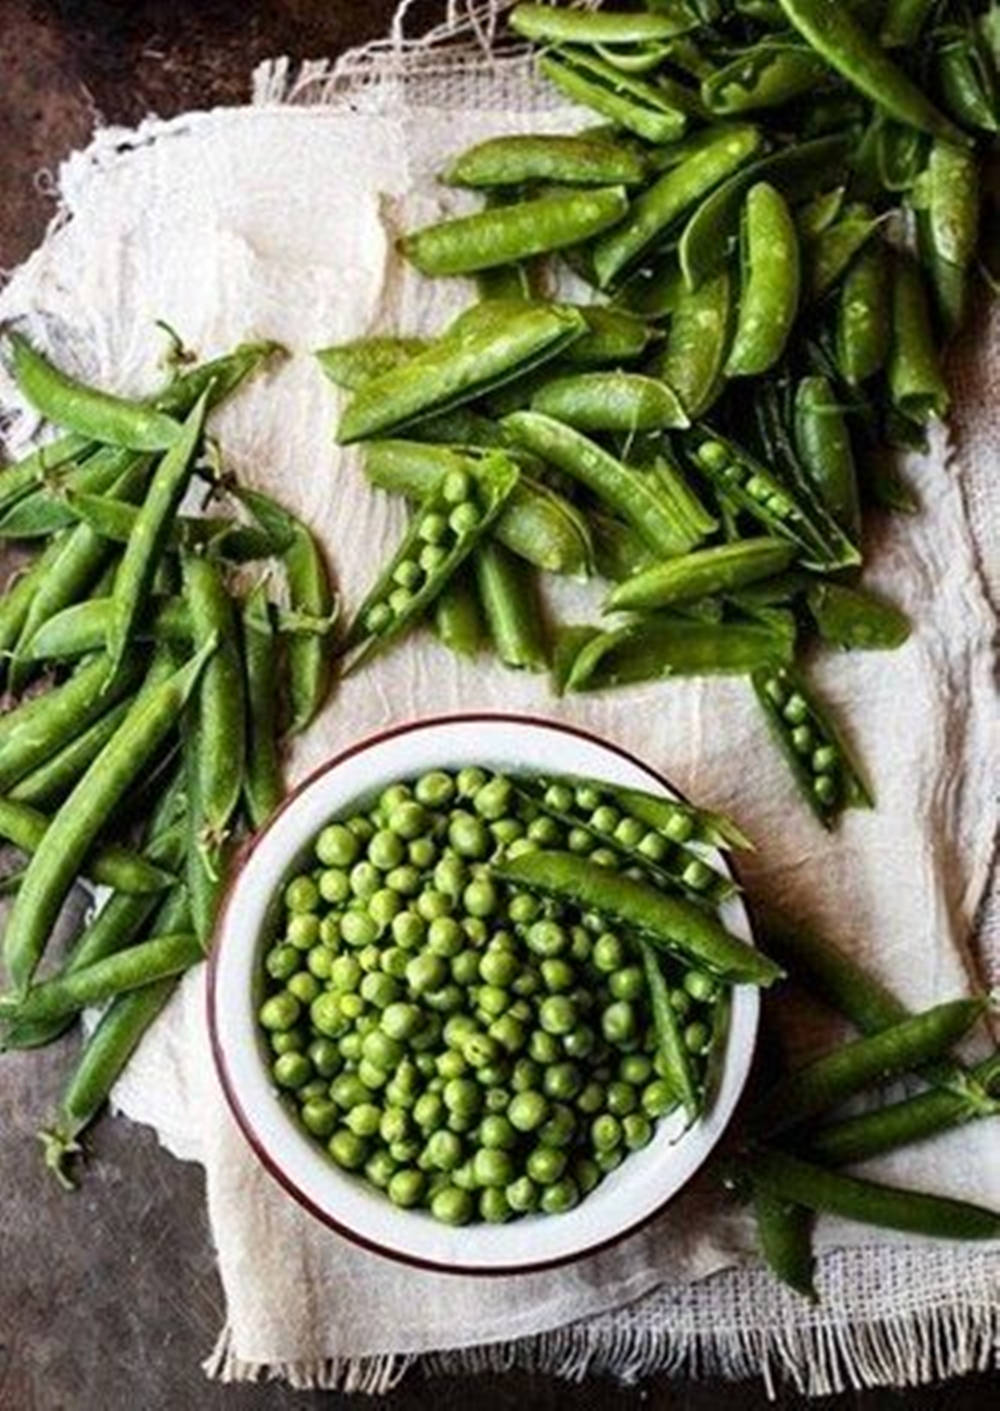 Shelled And Boiled Edamame Beans Picture